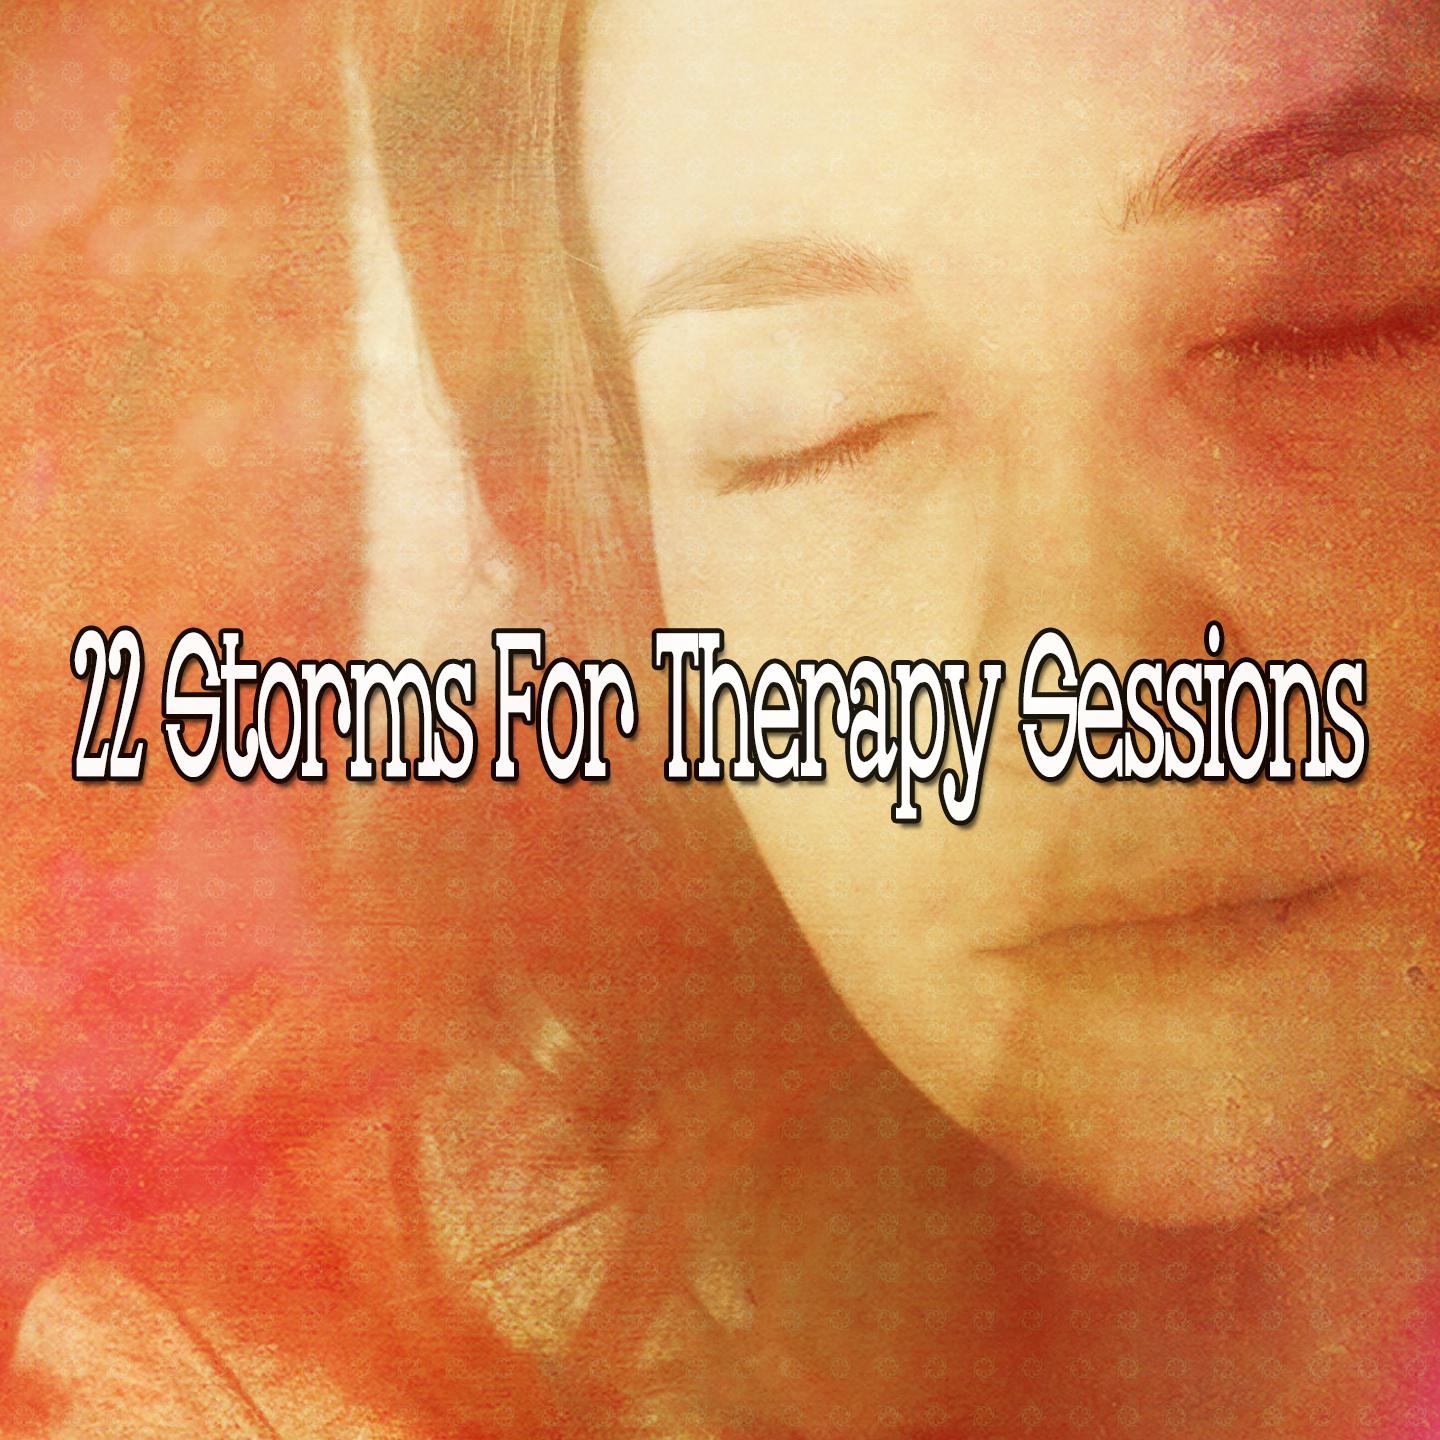 22 Storms for Therapy Sessions